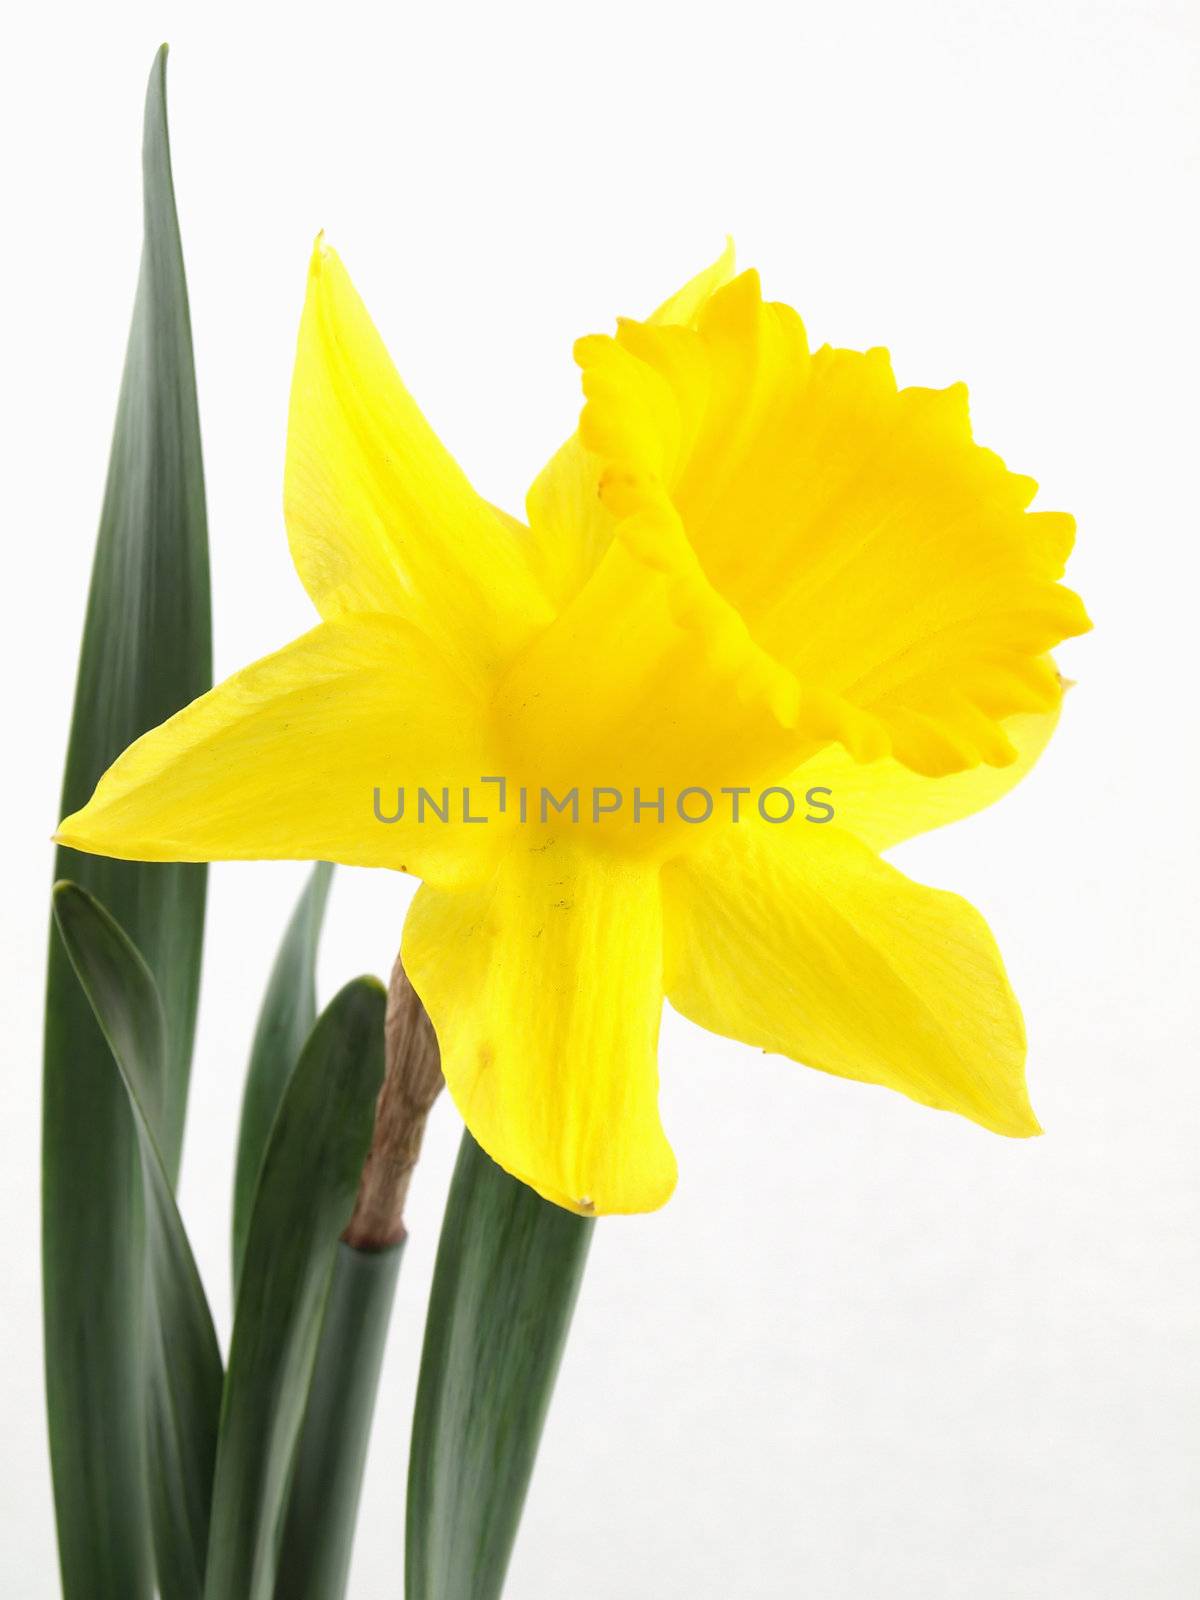 A vibrant yellow narcissus daffodil isolated against a white background.